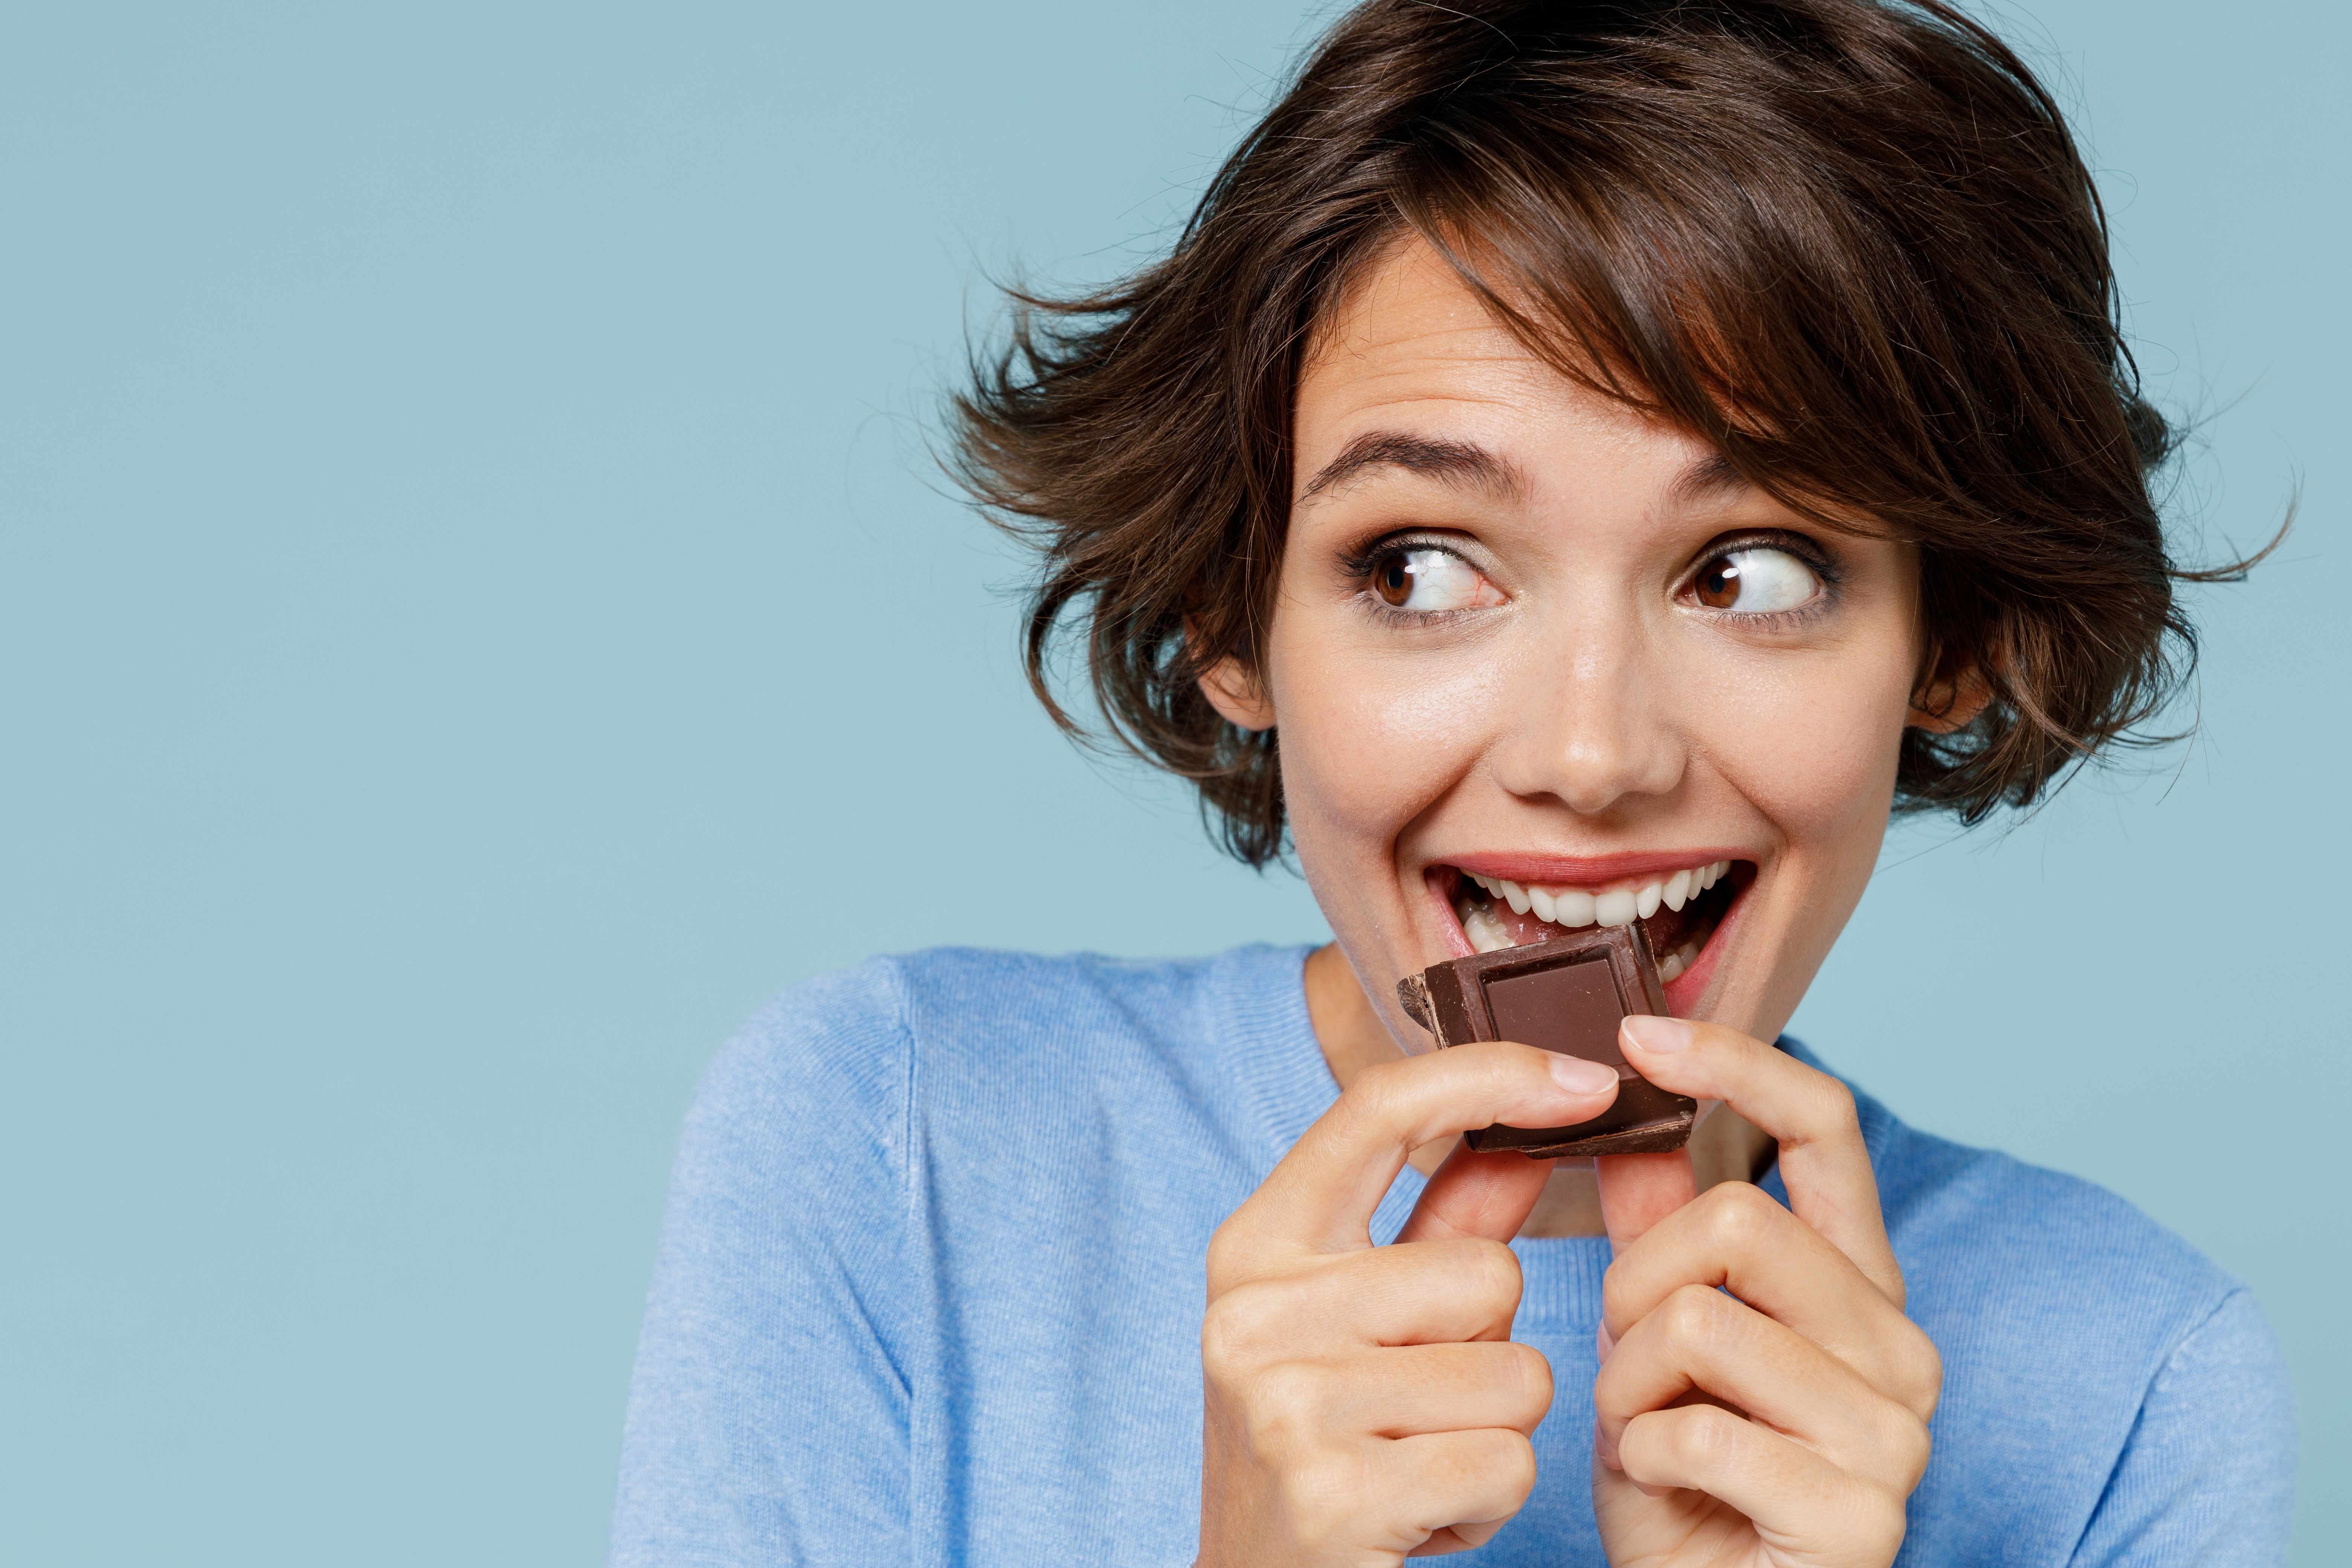 A chocolate-lover treats herself to a piece of candy bar.